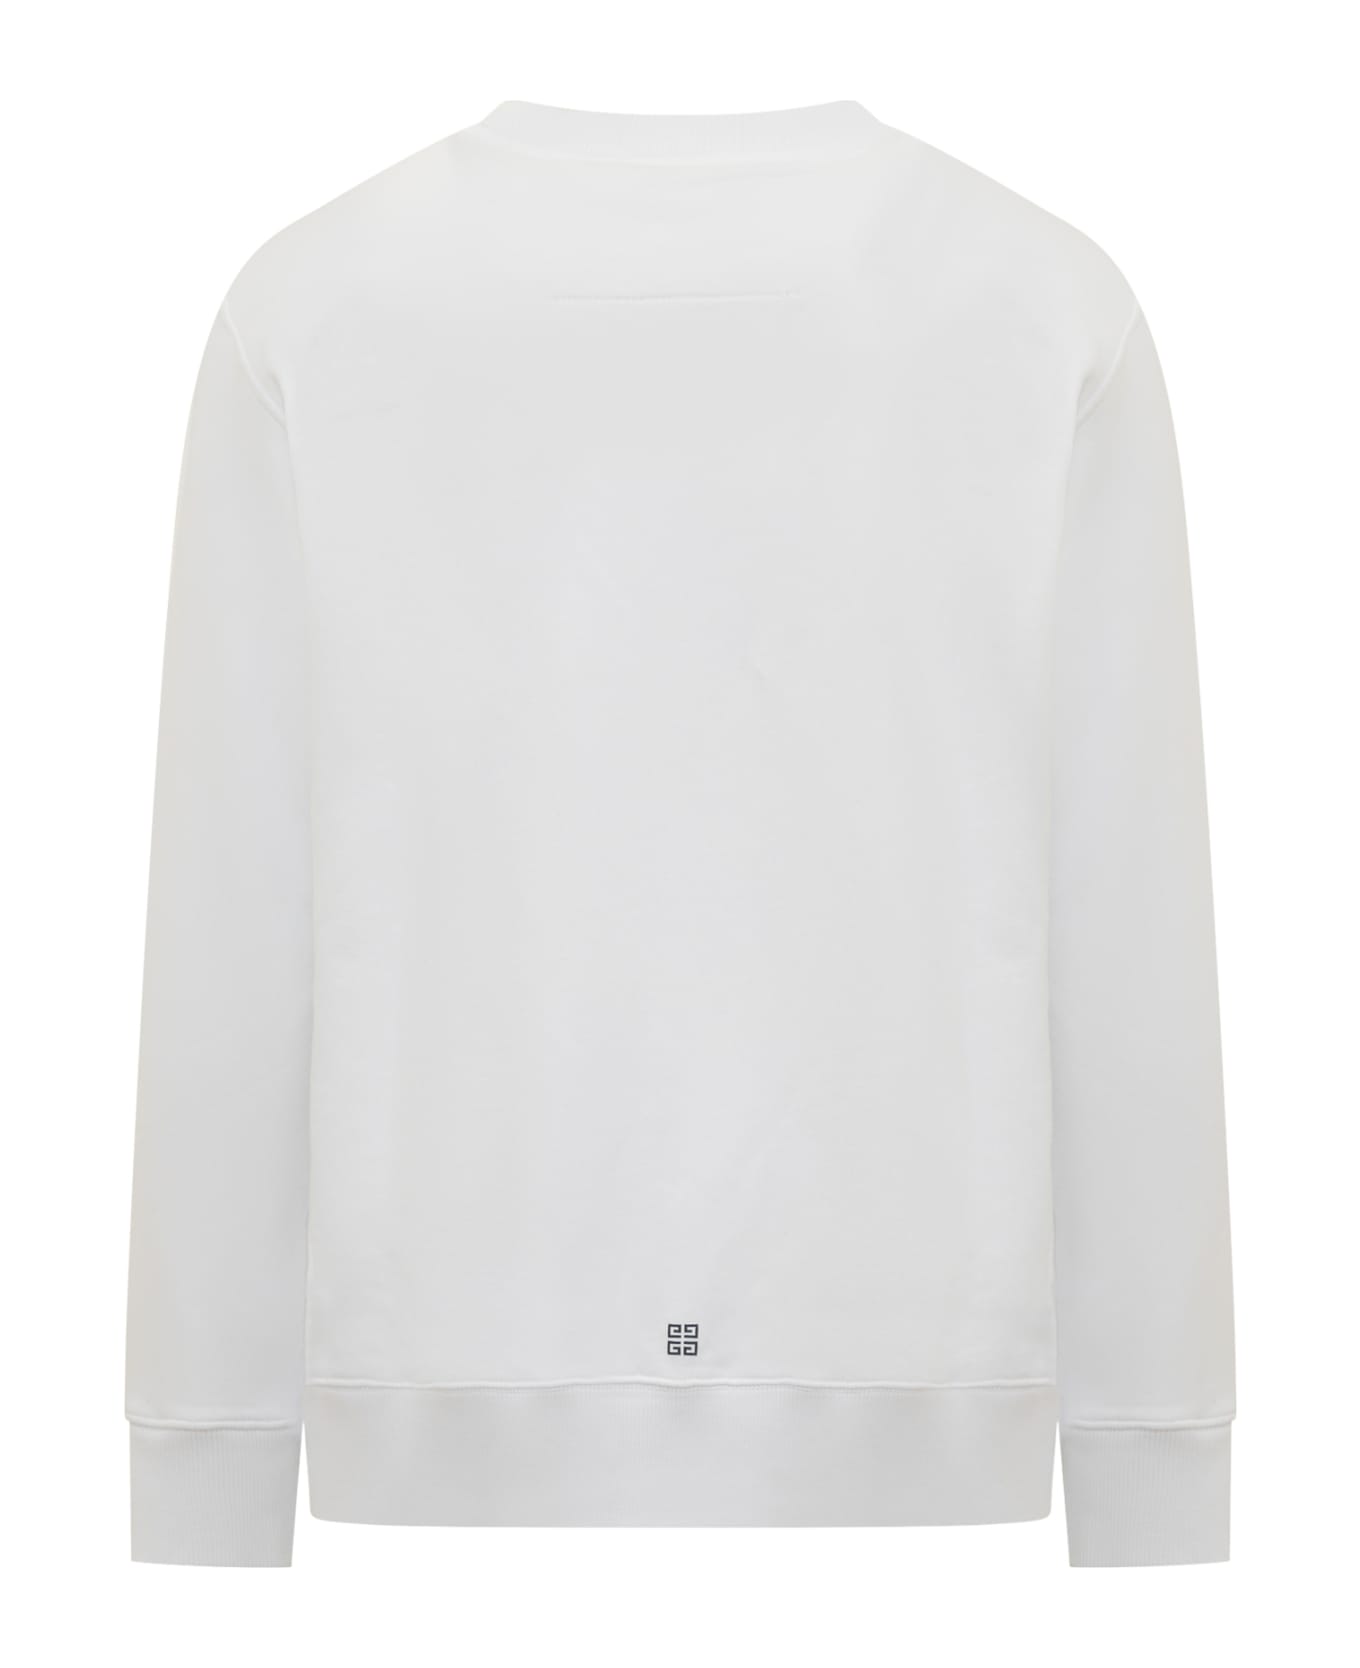 Givenchy Crewneck Sweatshirt With Contrasting Lettering - White